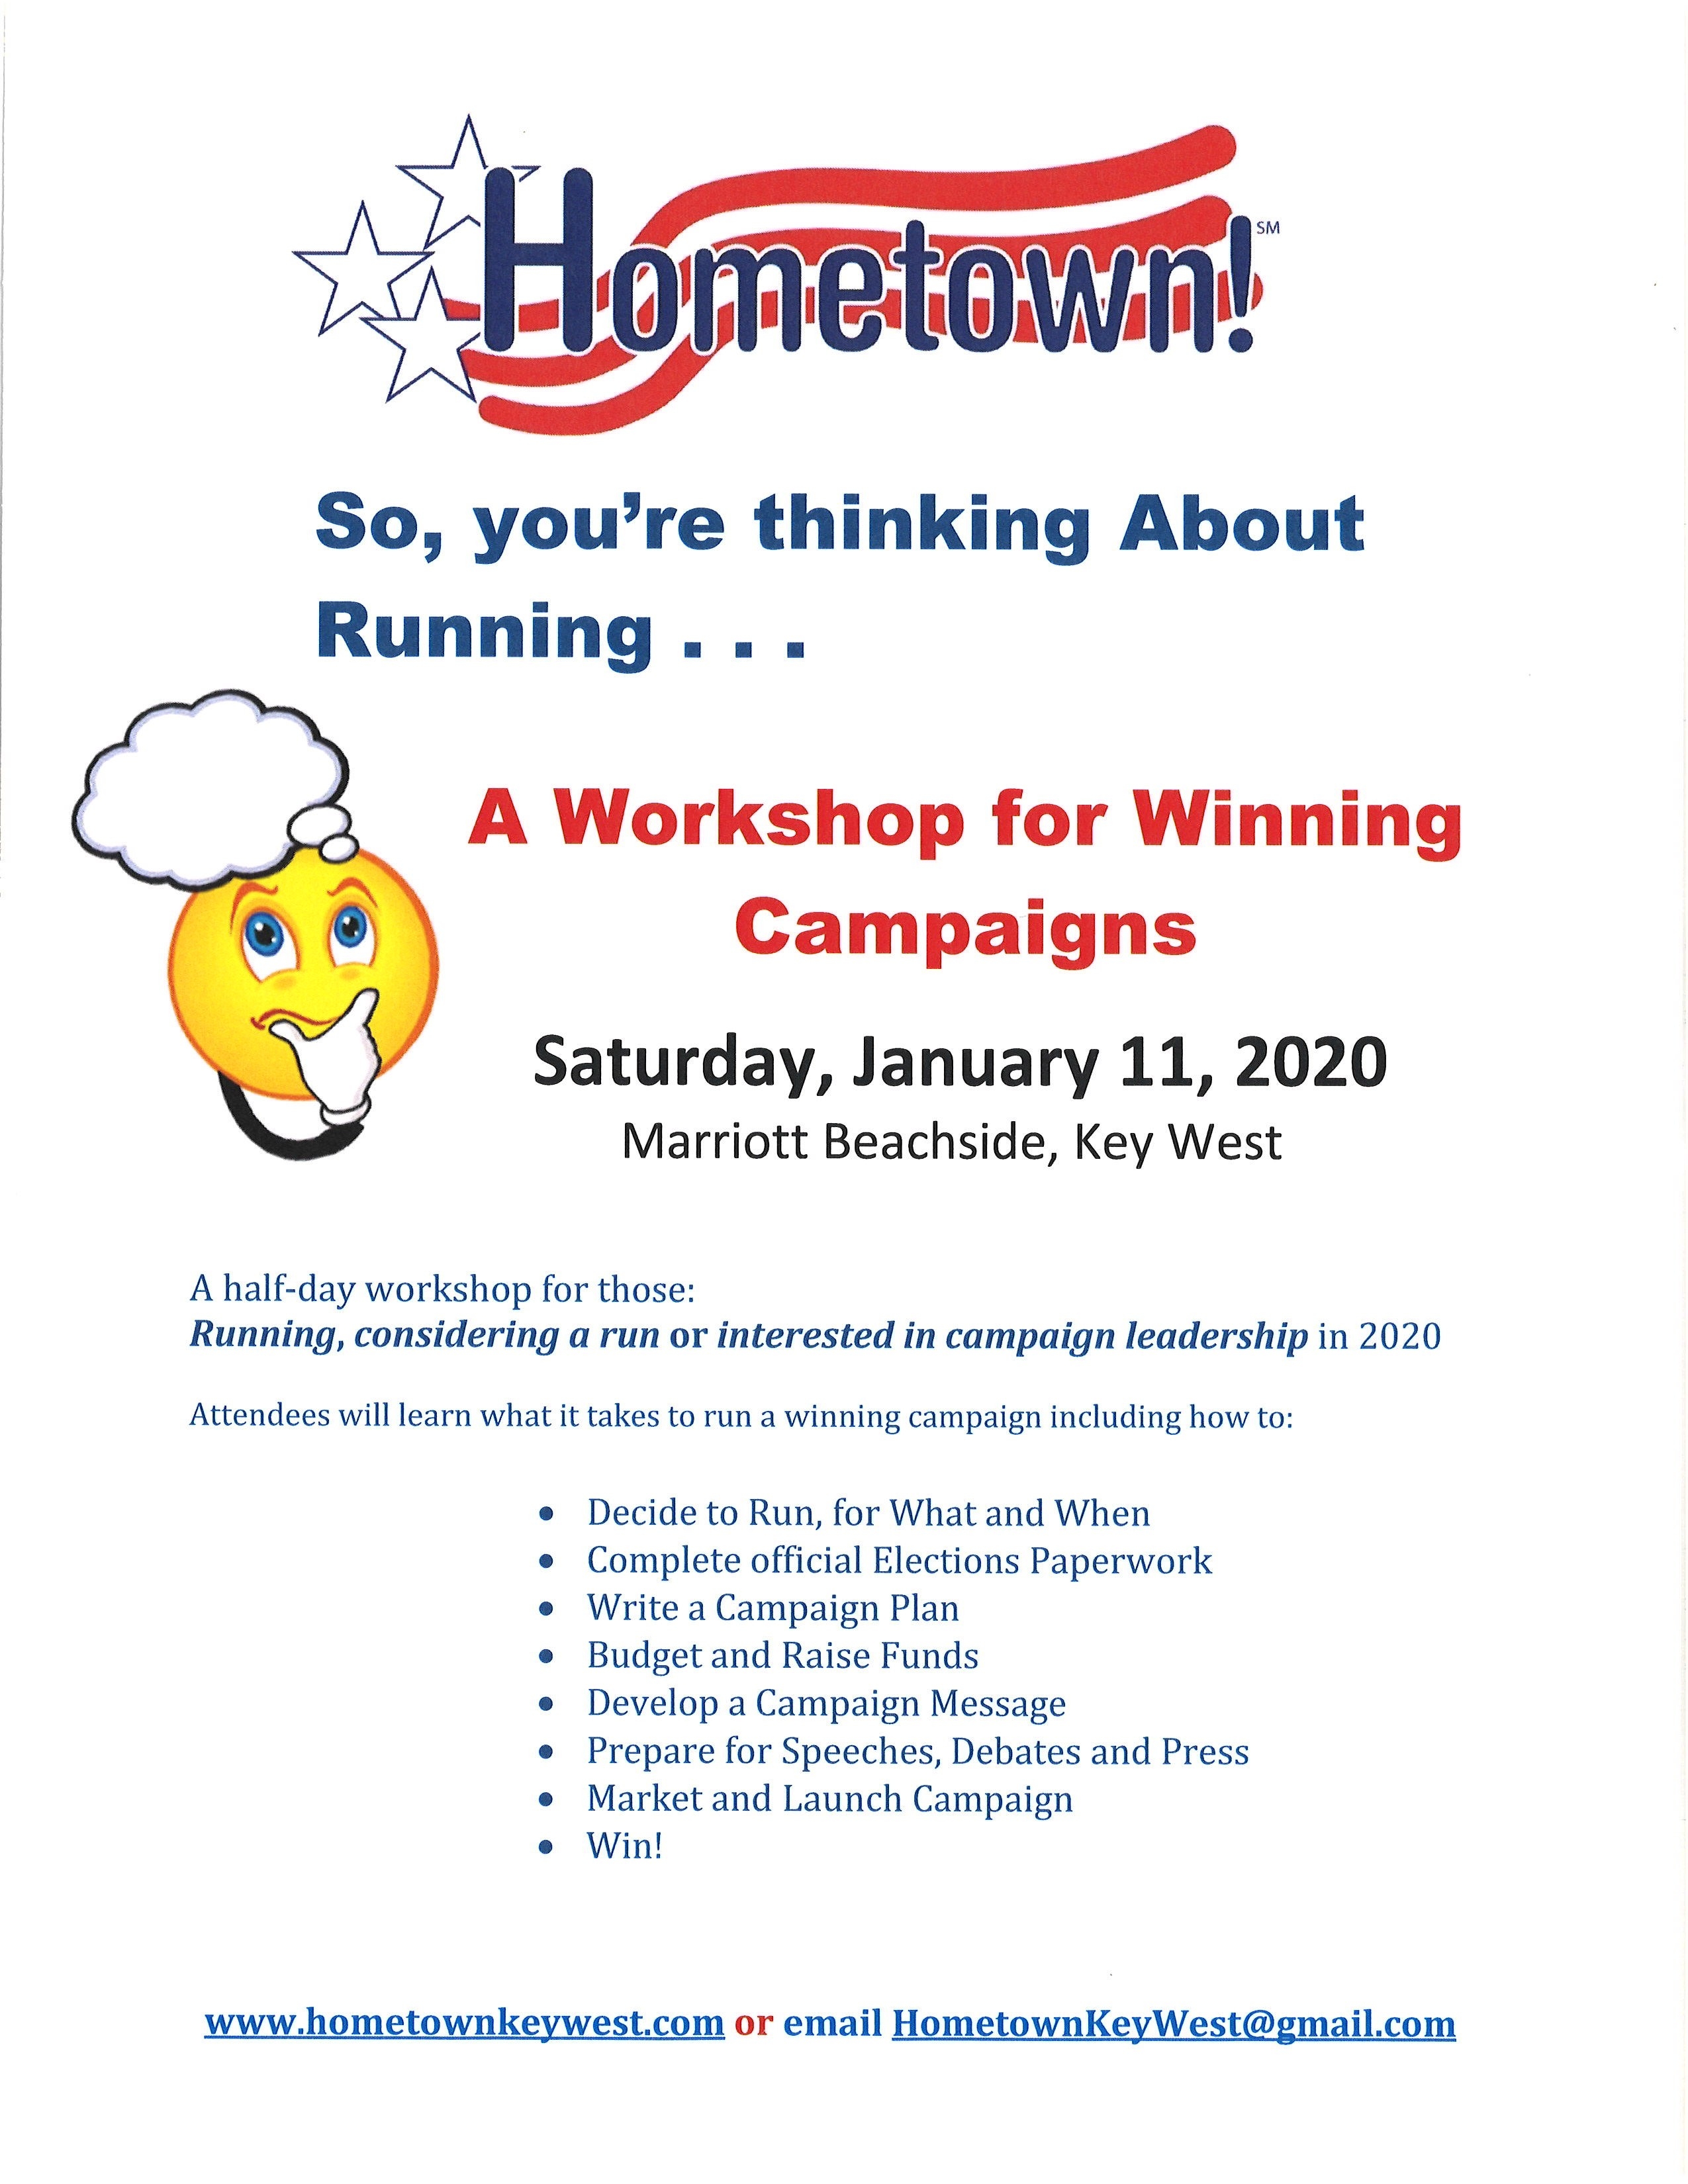 So, You&#039;re Thinking About Running: A Workshop For Winning-Key West Calendar January 2020